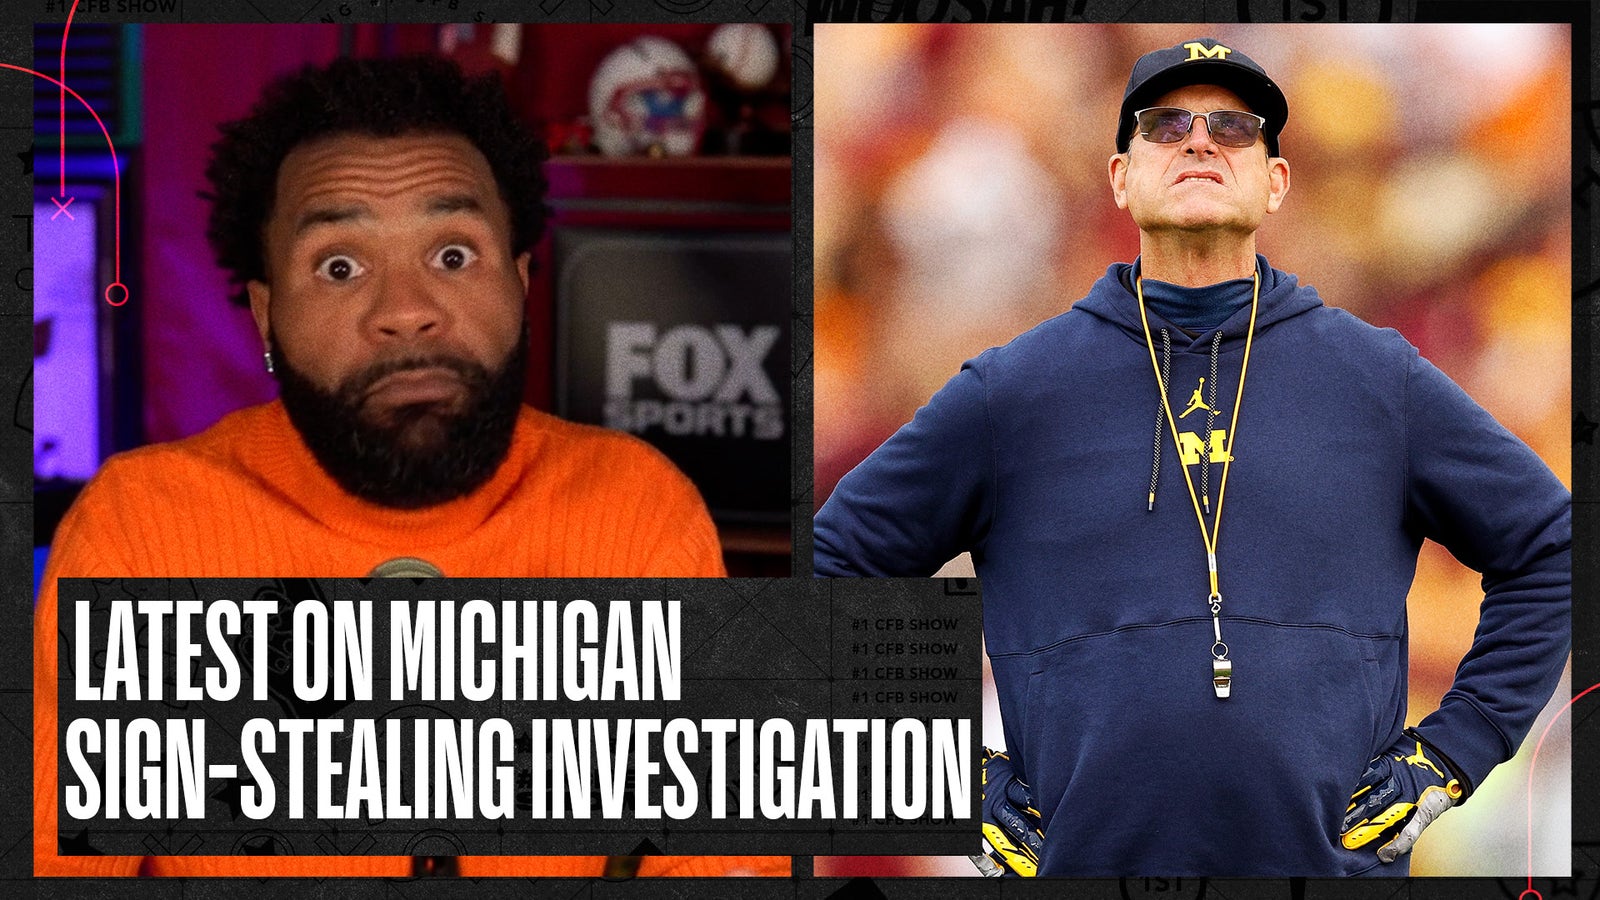 Latest on sign-stealing investigation: Will the Big Ten punish Michigan?